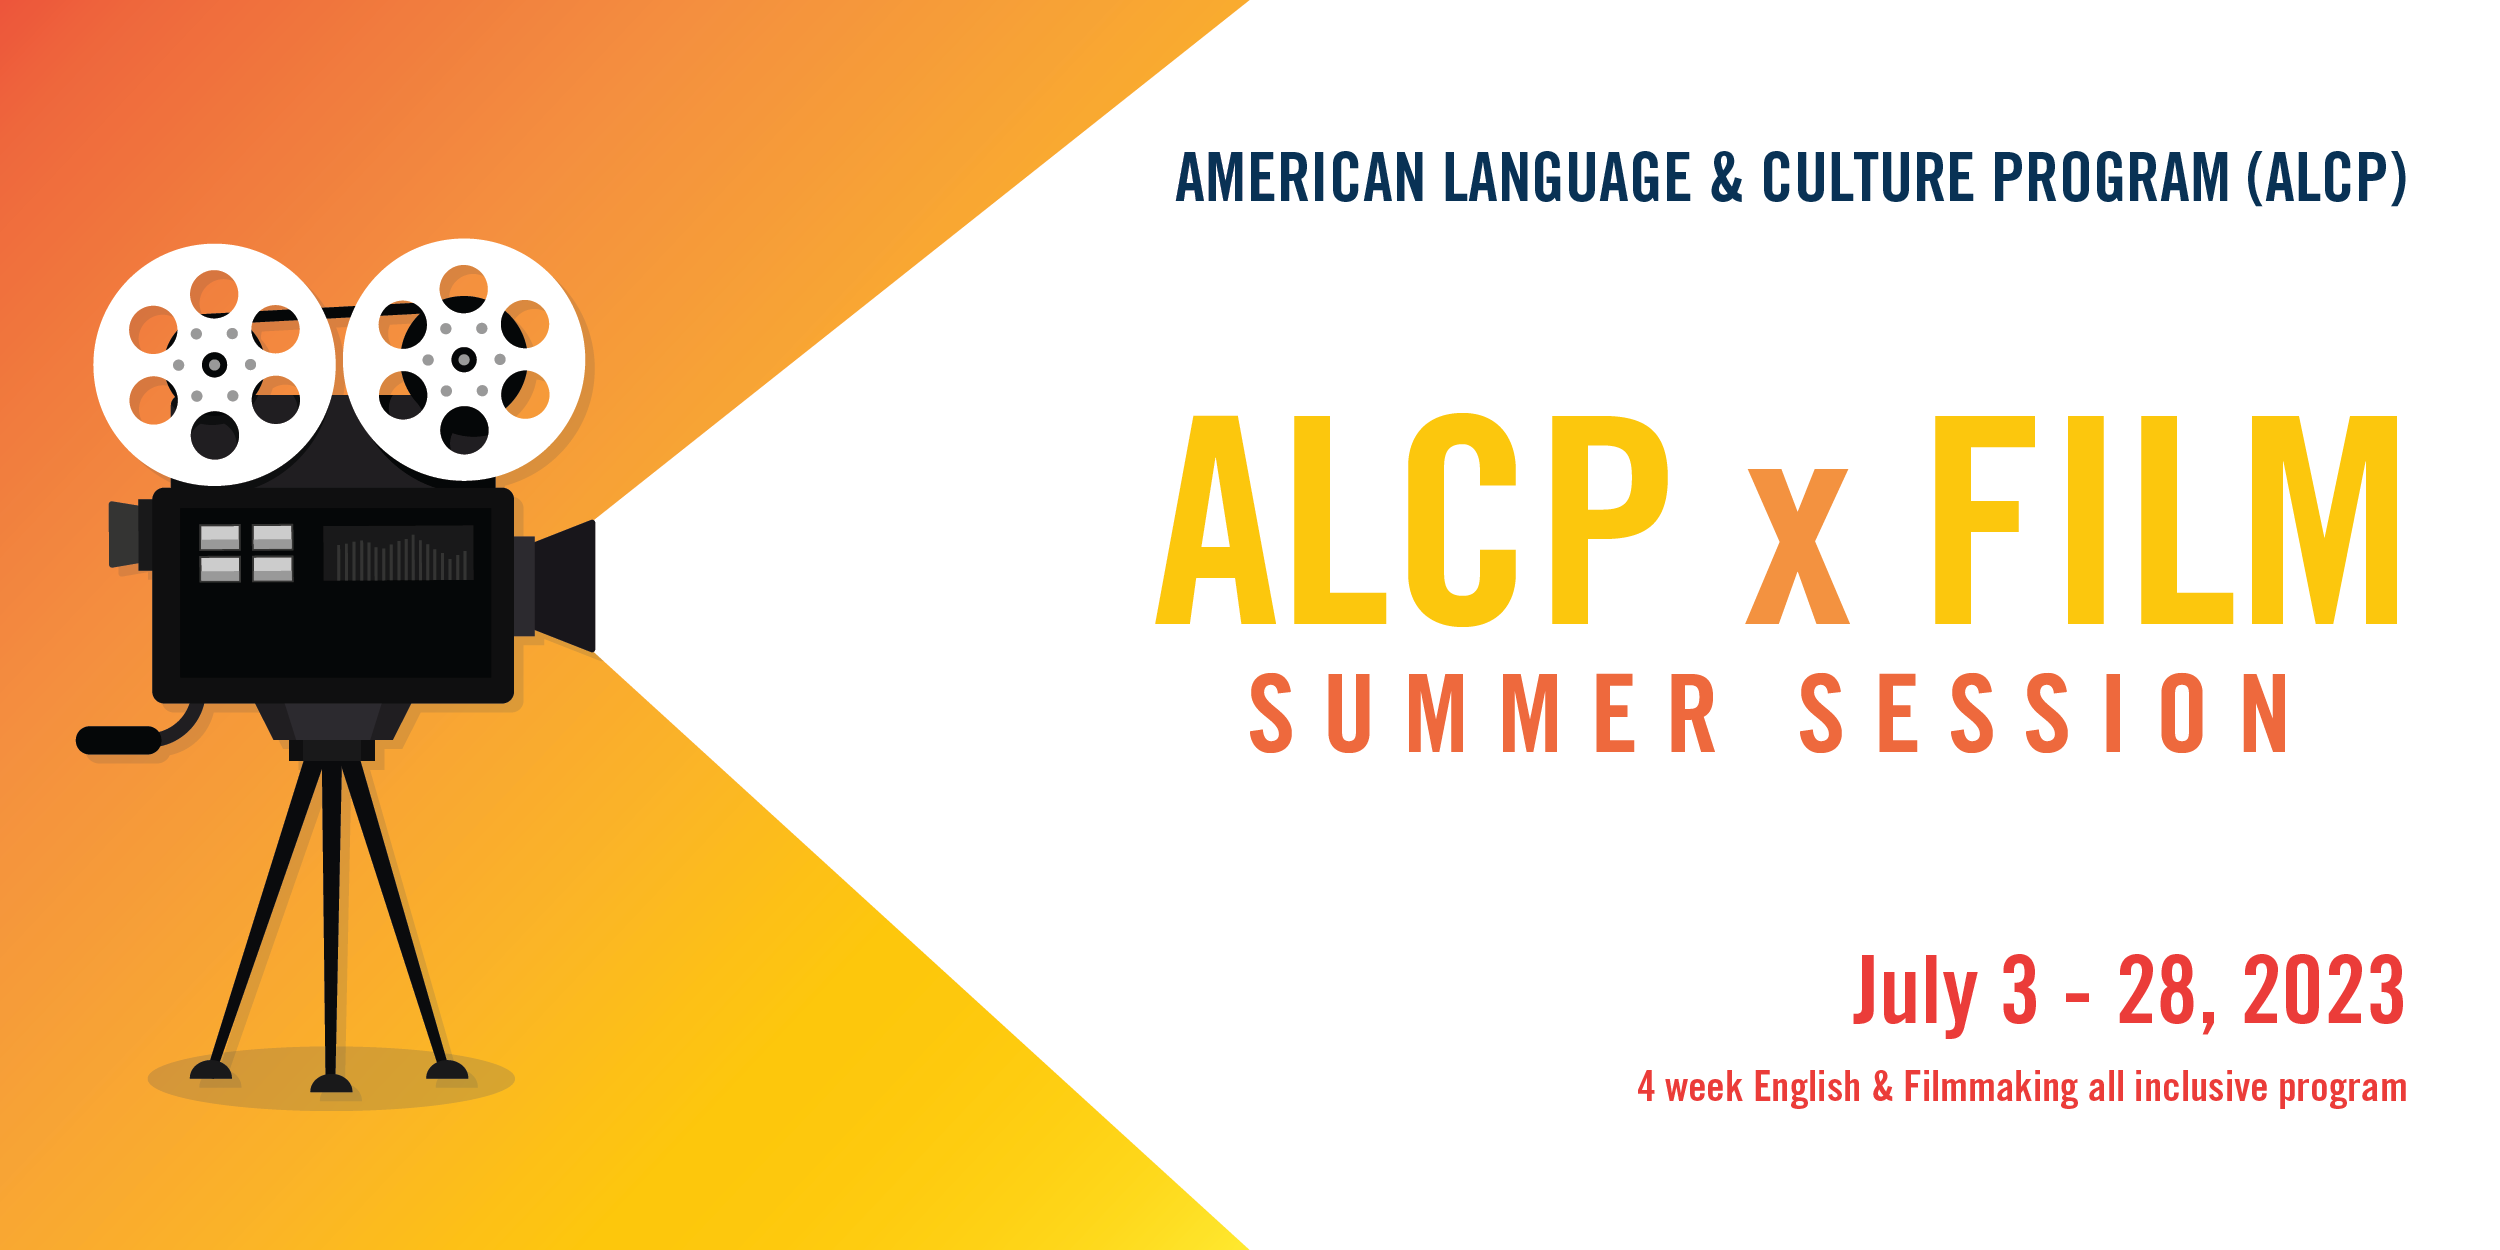 American Language and Culture Program, ALCP x FILM summer session, July 3-28, 2023. 3 week English and Filmmaking inclusive program